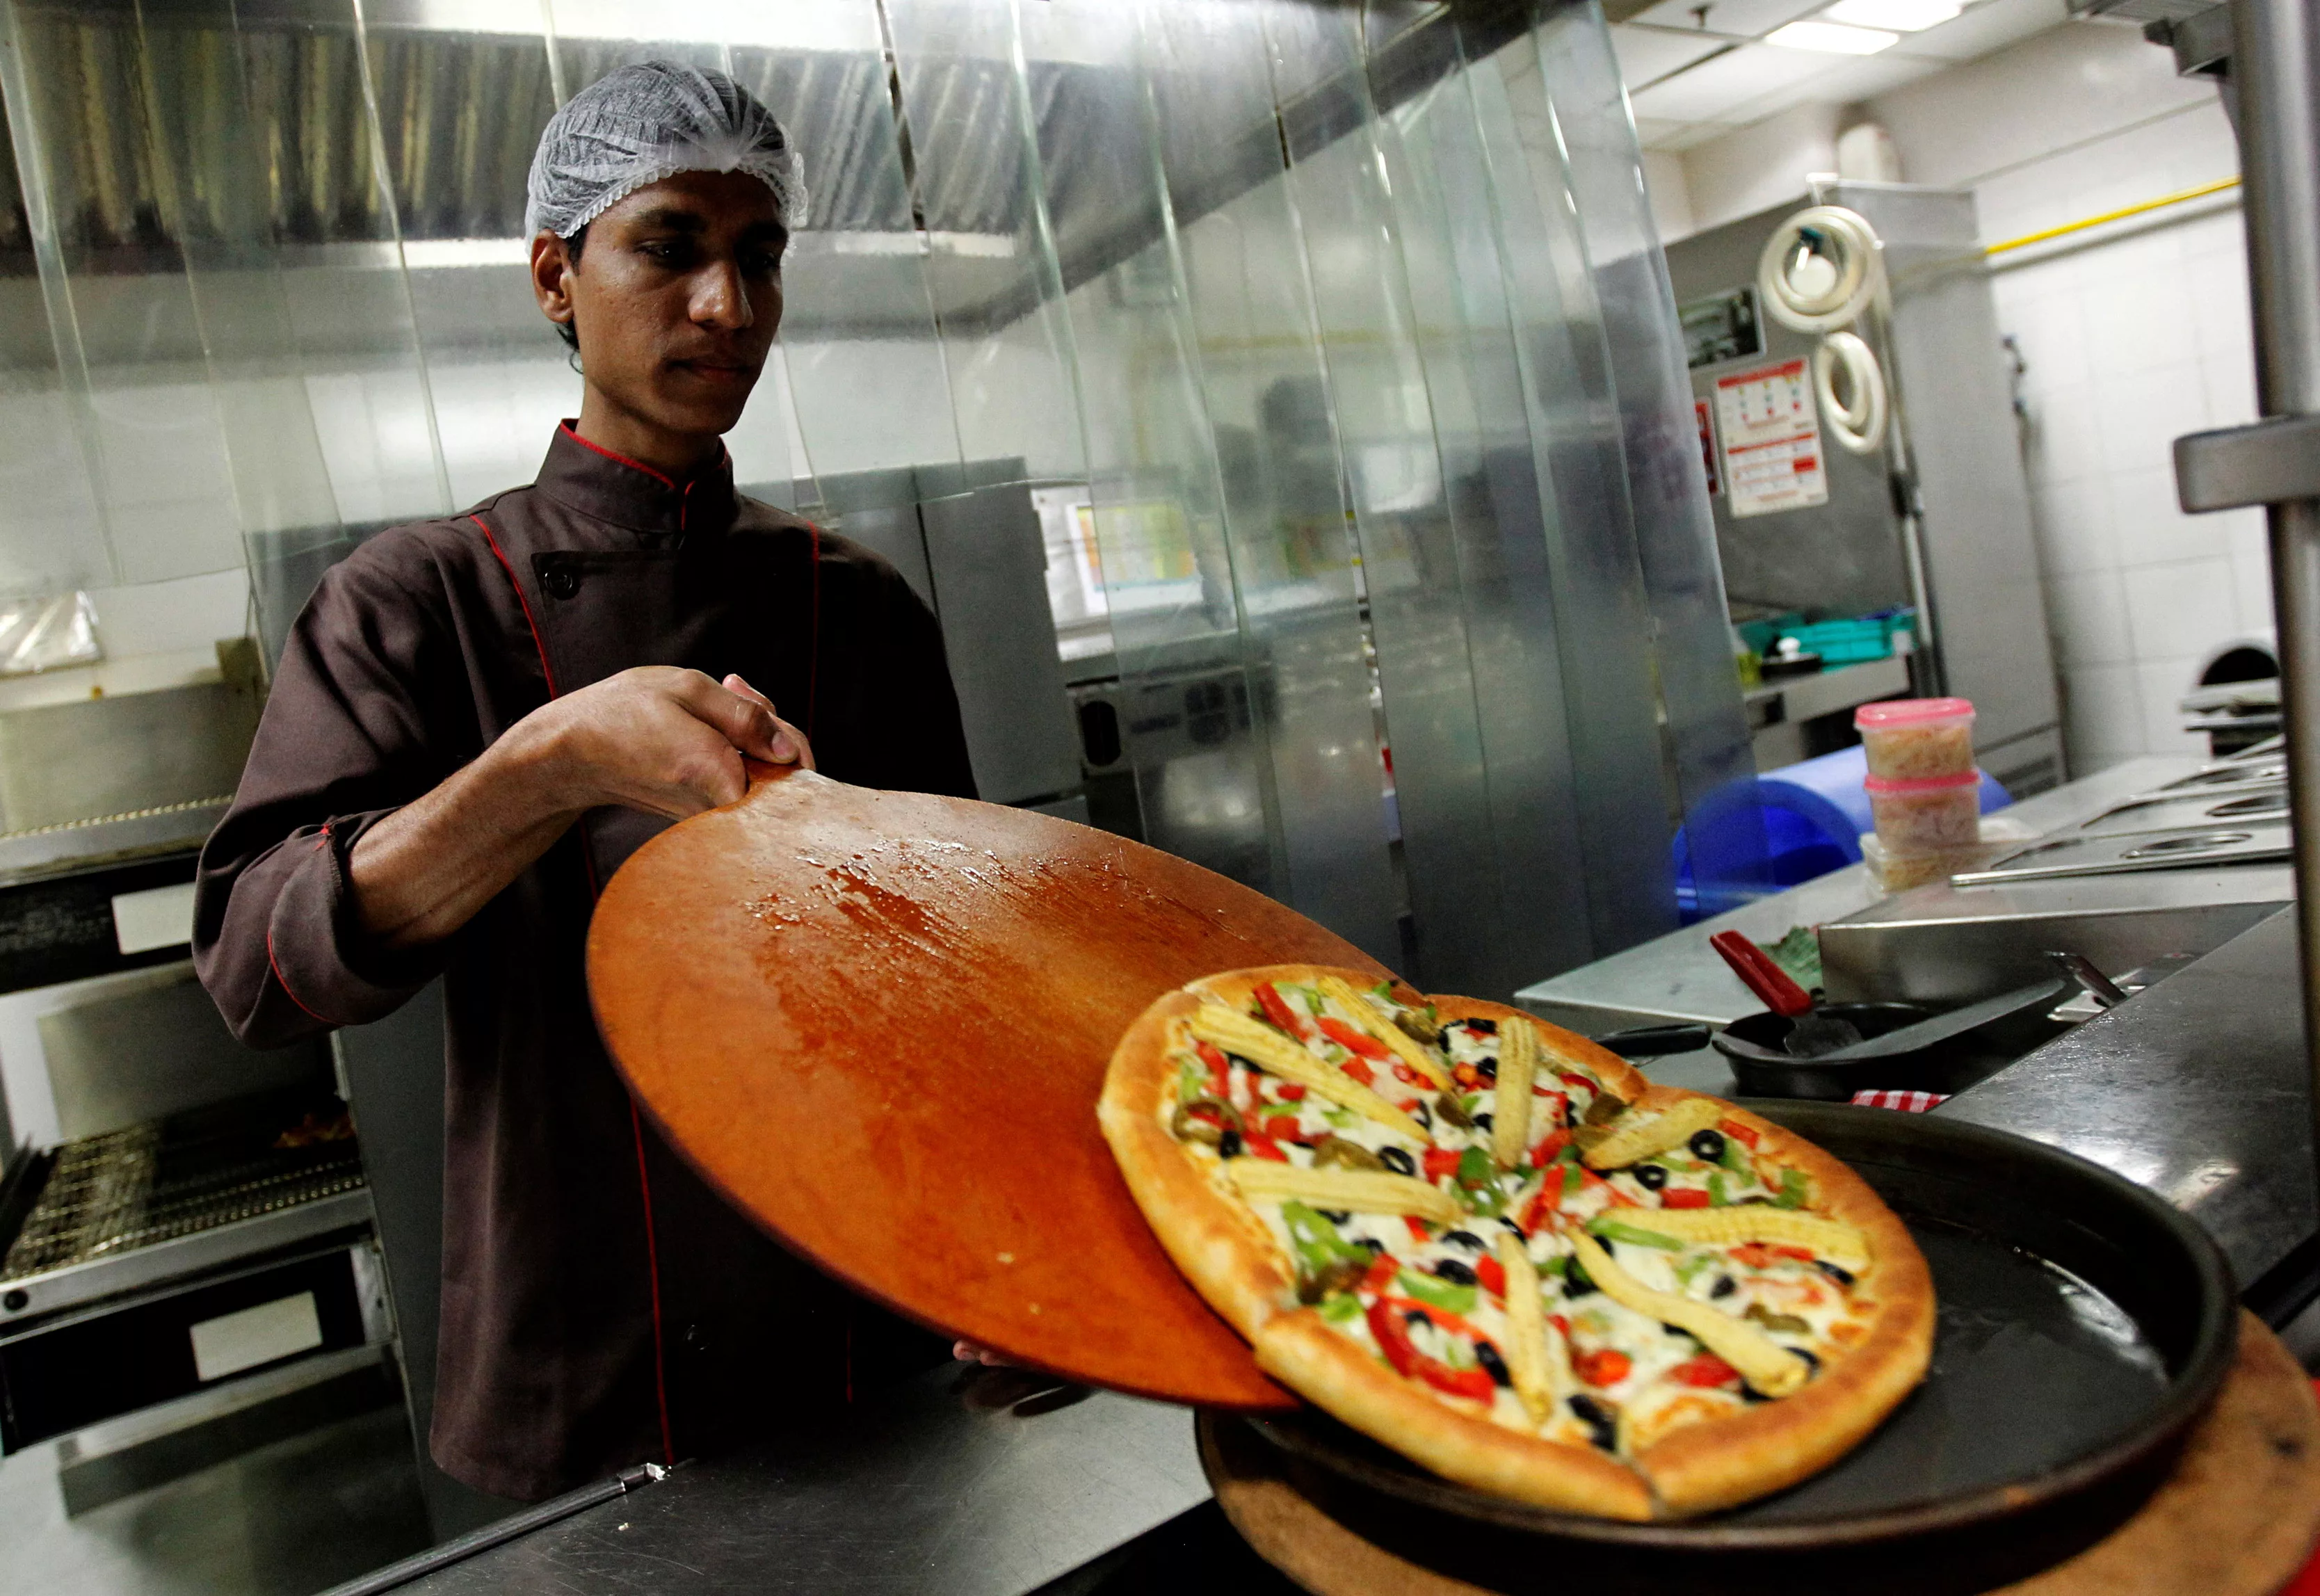 file-photo-a-cook-slides-a-pizza-onto-a-serving-plate-in-the-kitchen-at-a-pizza-hut-restaurant-in-mumbai-march-29-2011